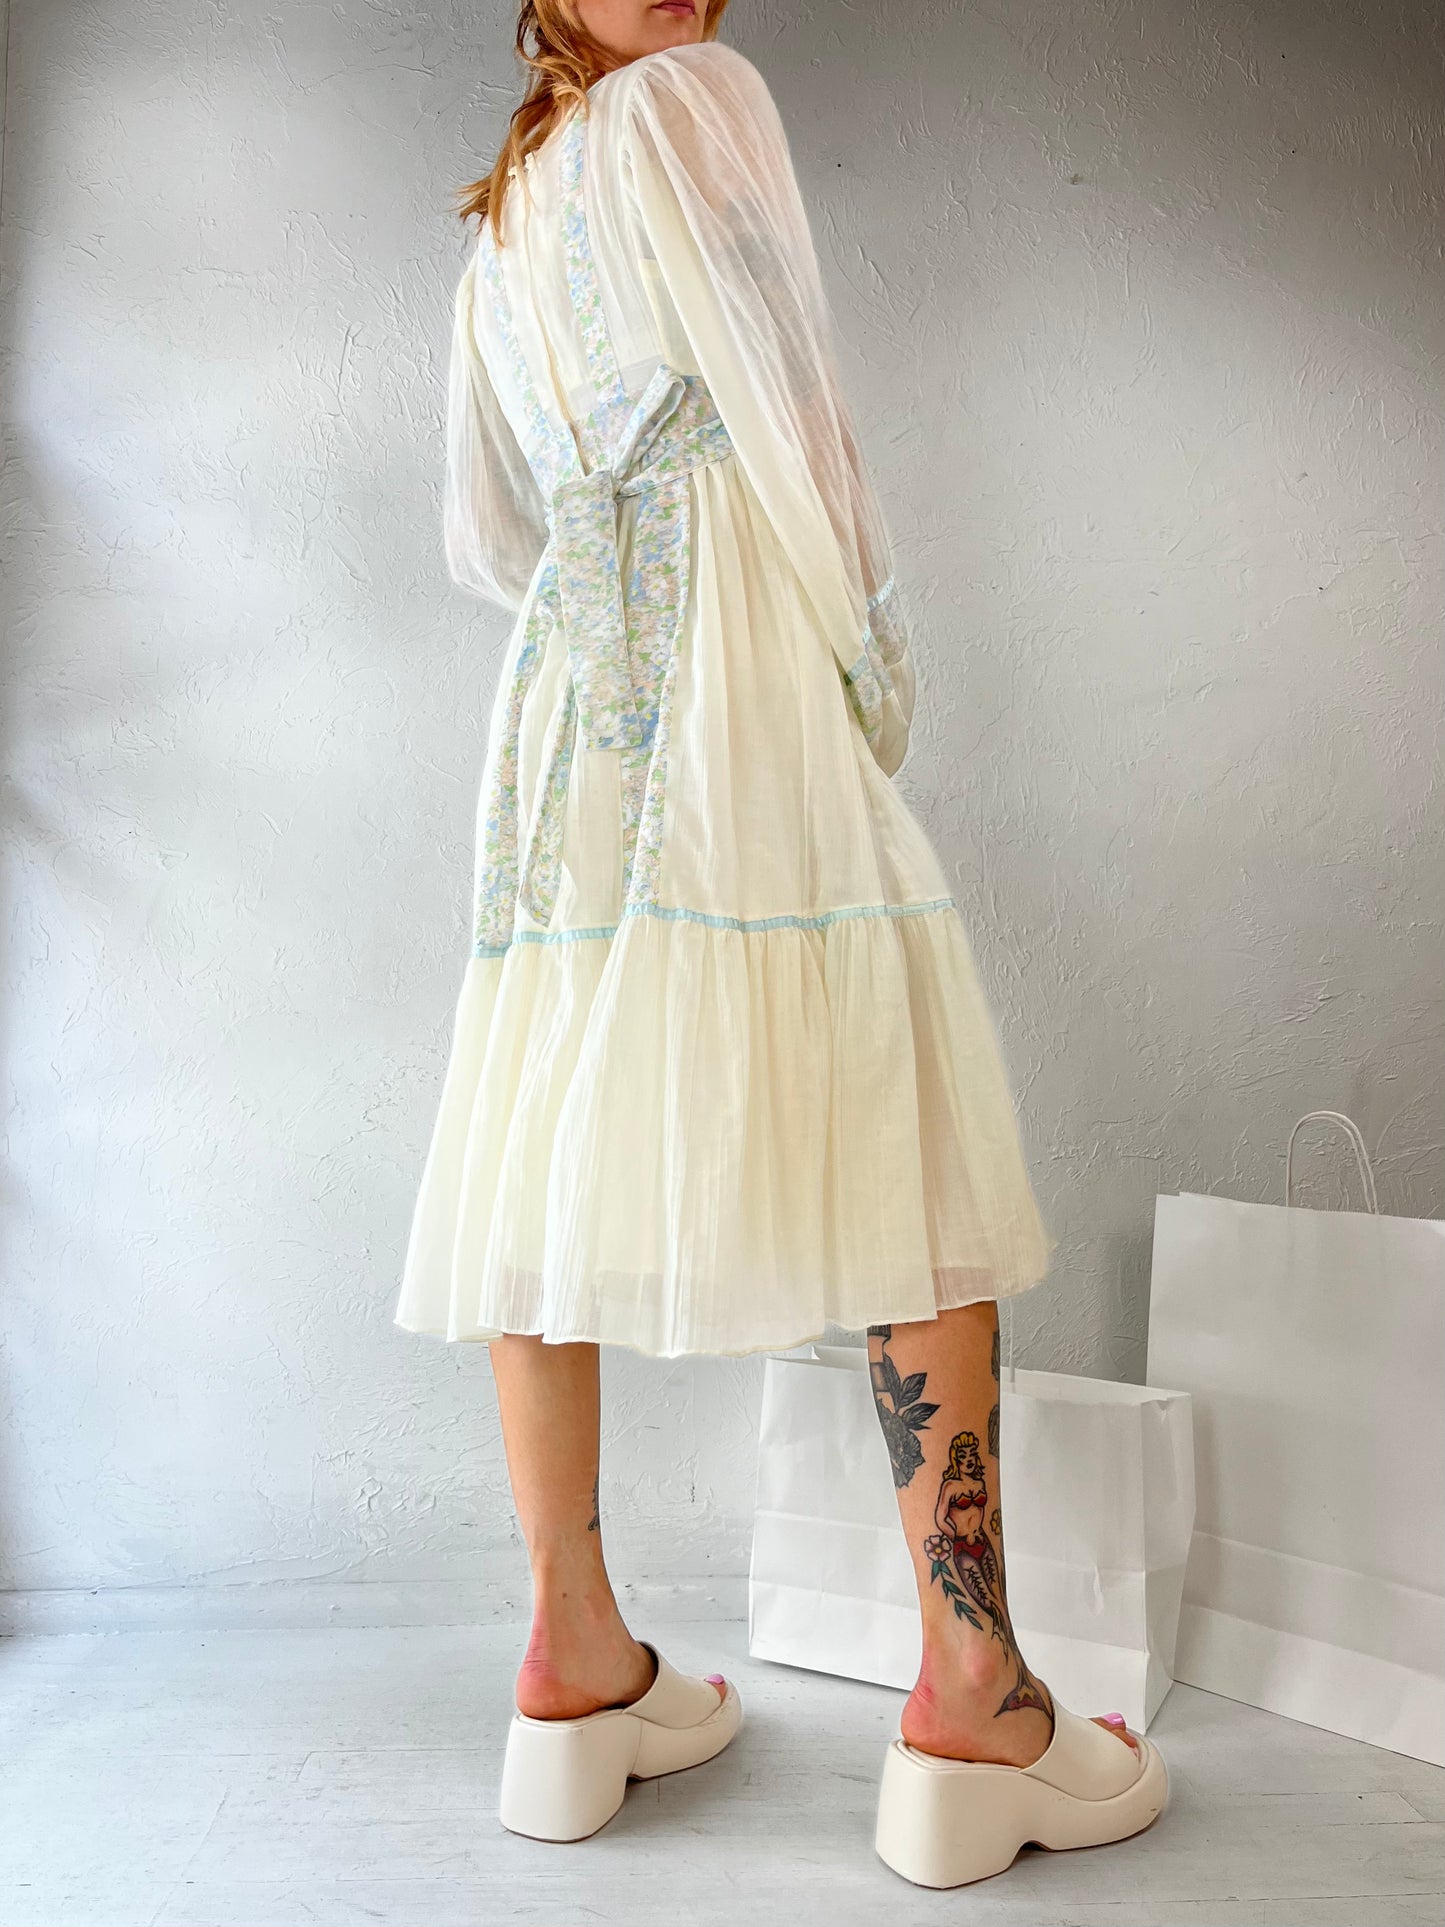 70s 'Gunne Sax' Cream and Floral Long Sleeve Peasant Dress / Small